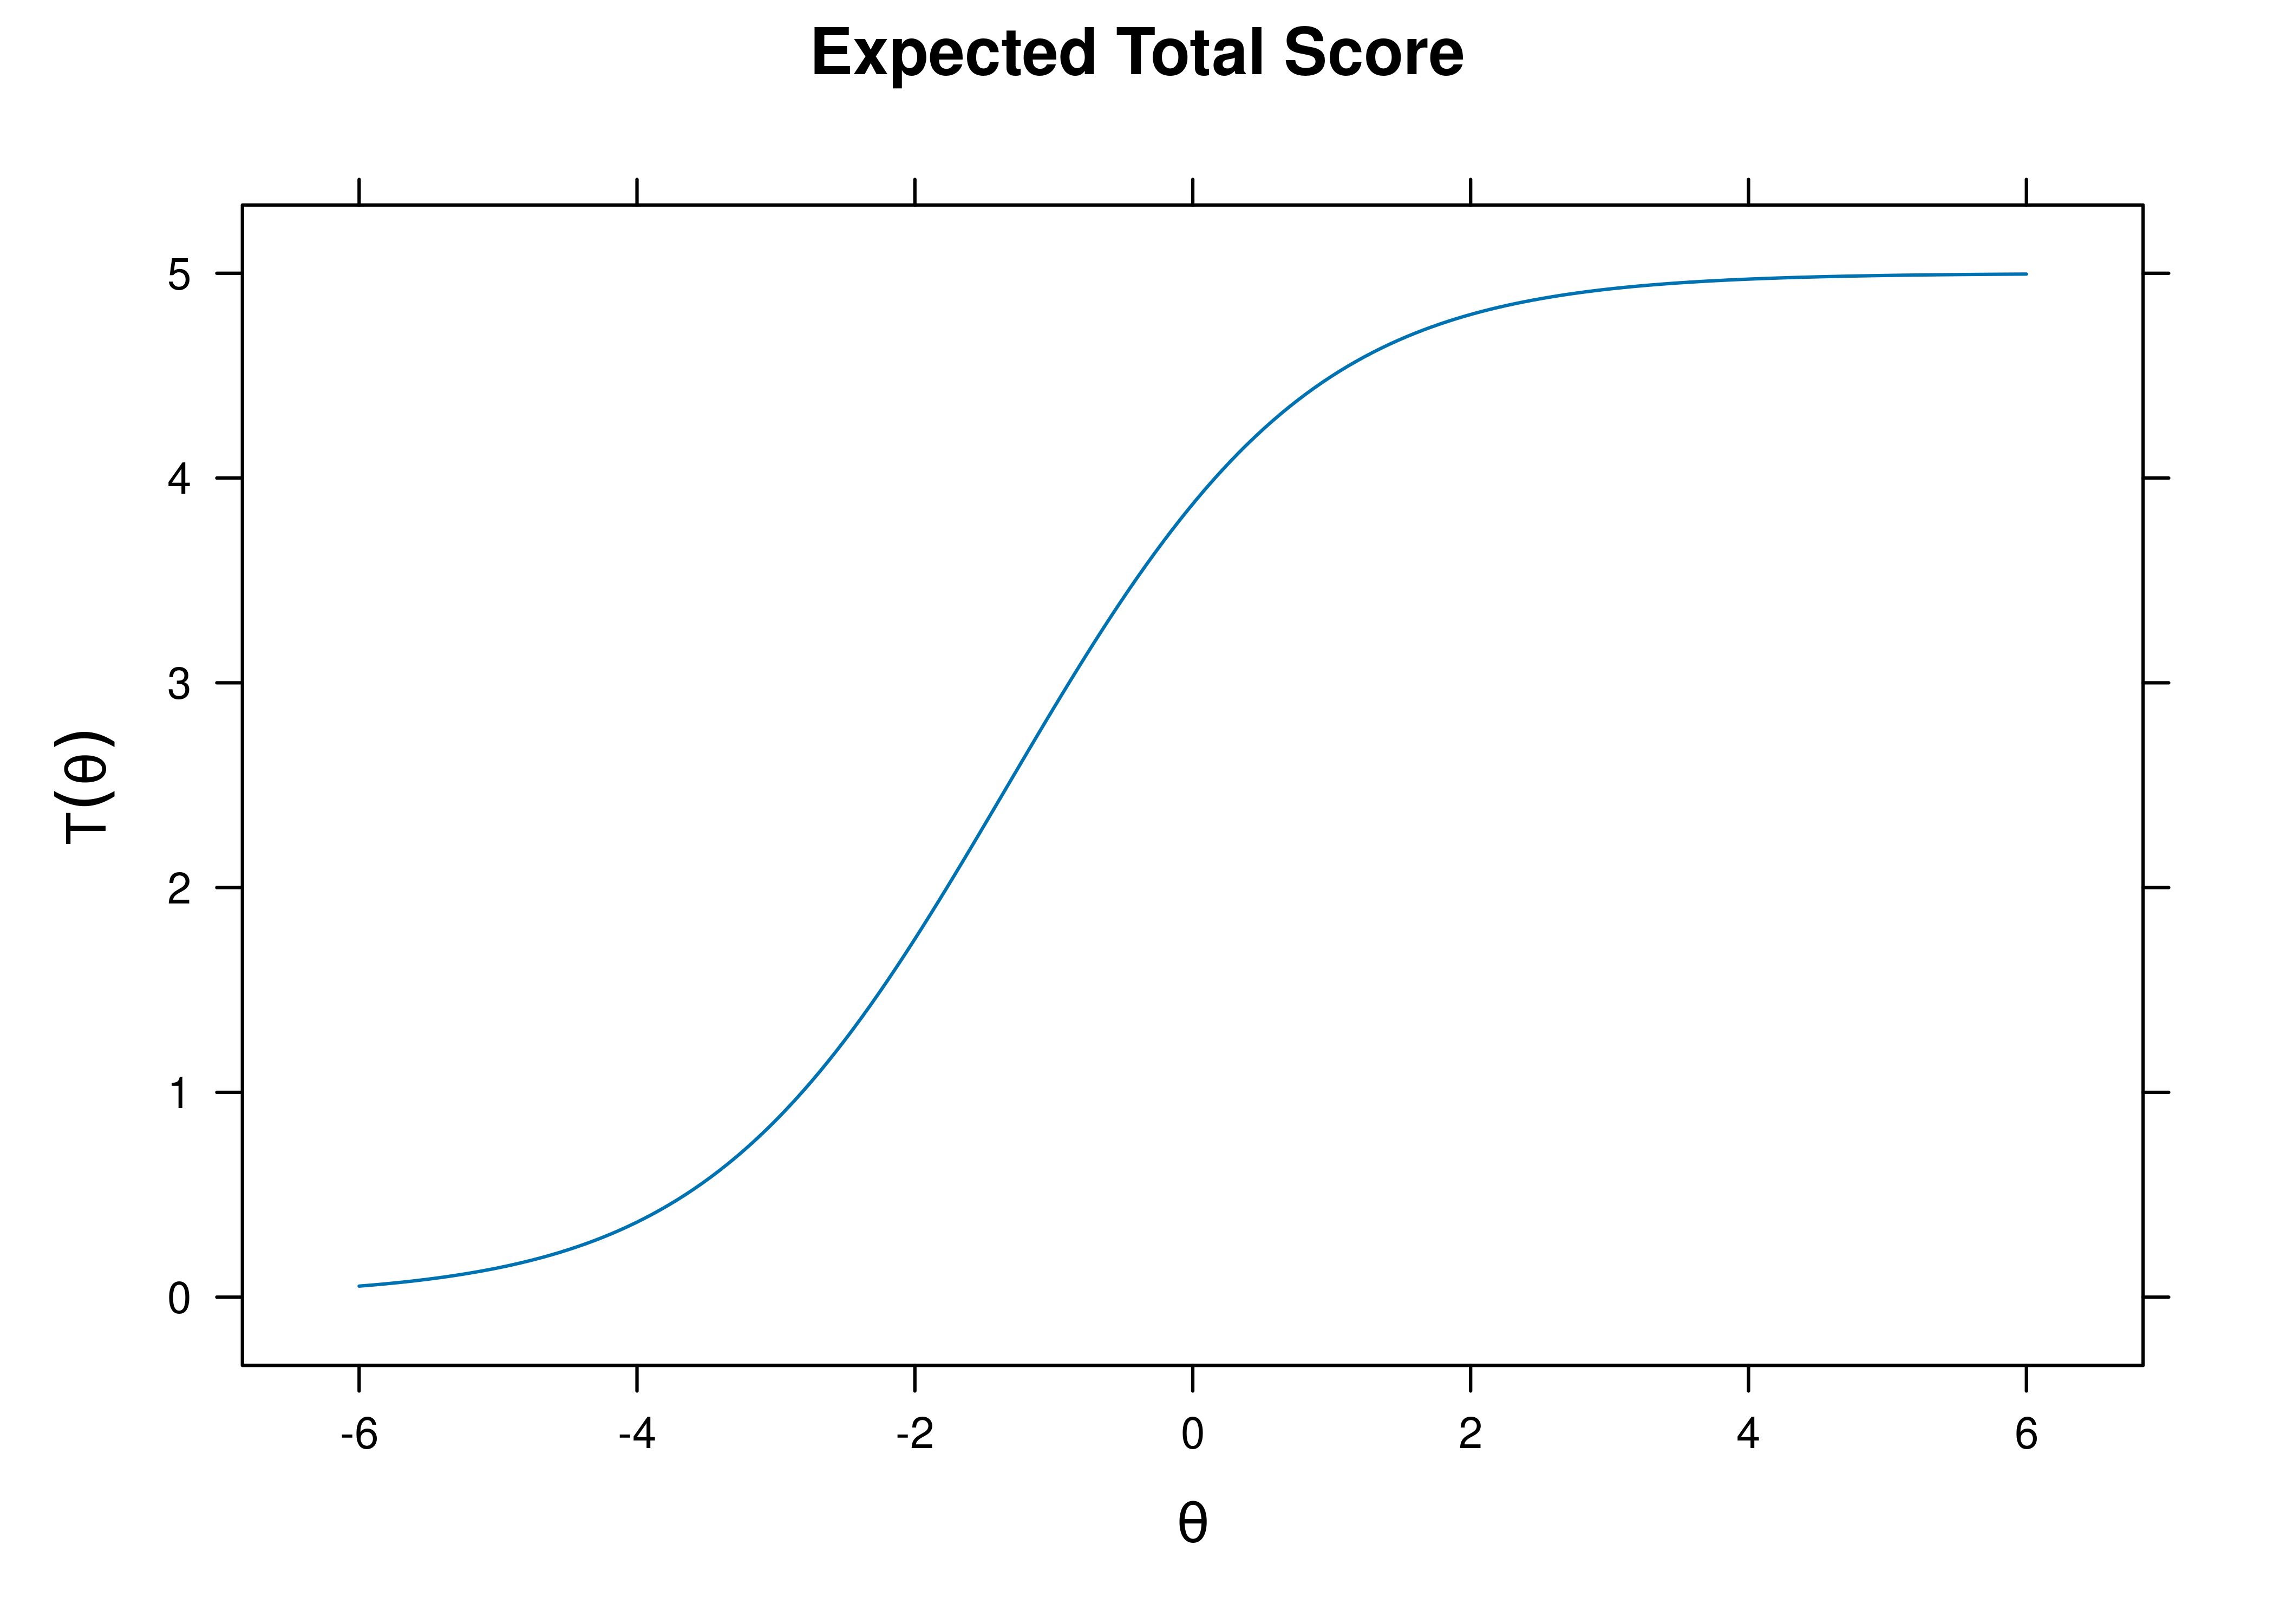 Test Characteristic Curve From Rasch Item Response Theory Model.